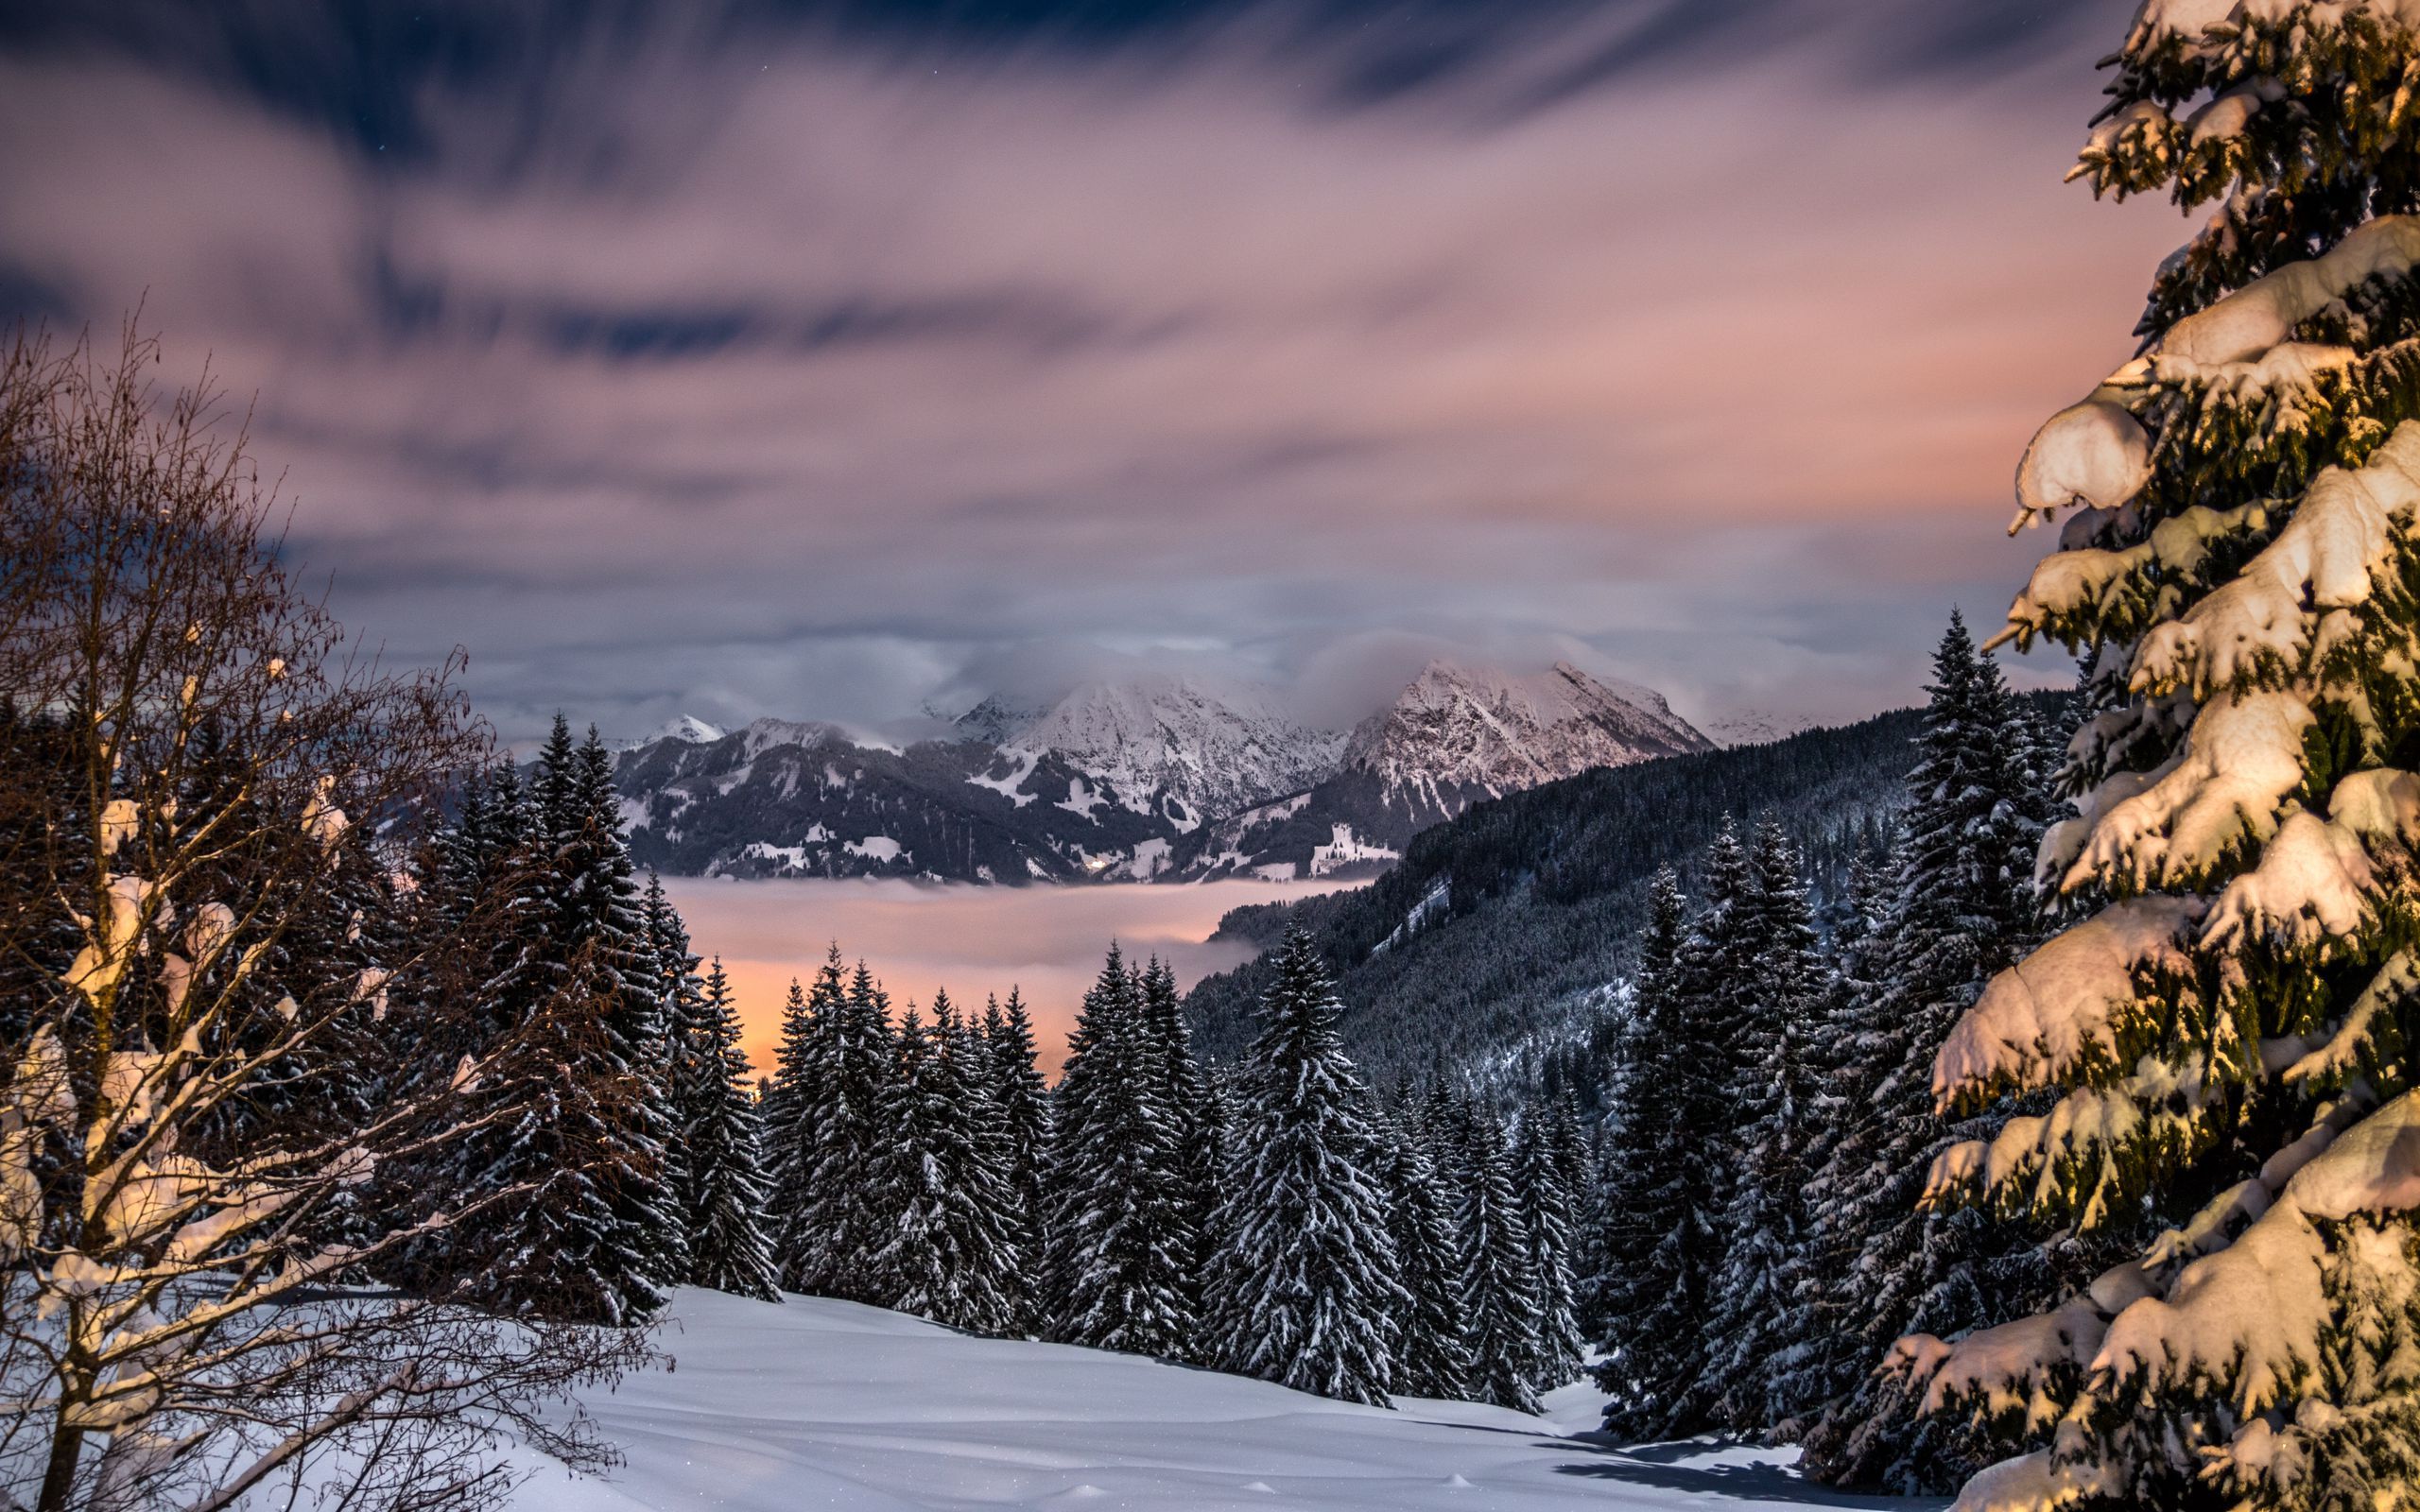 Download wallpaper 2560x1600 winter, mountains, snow, trees